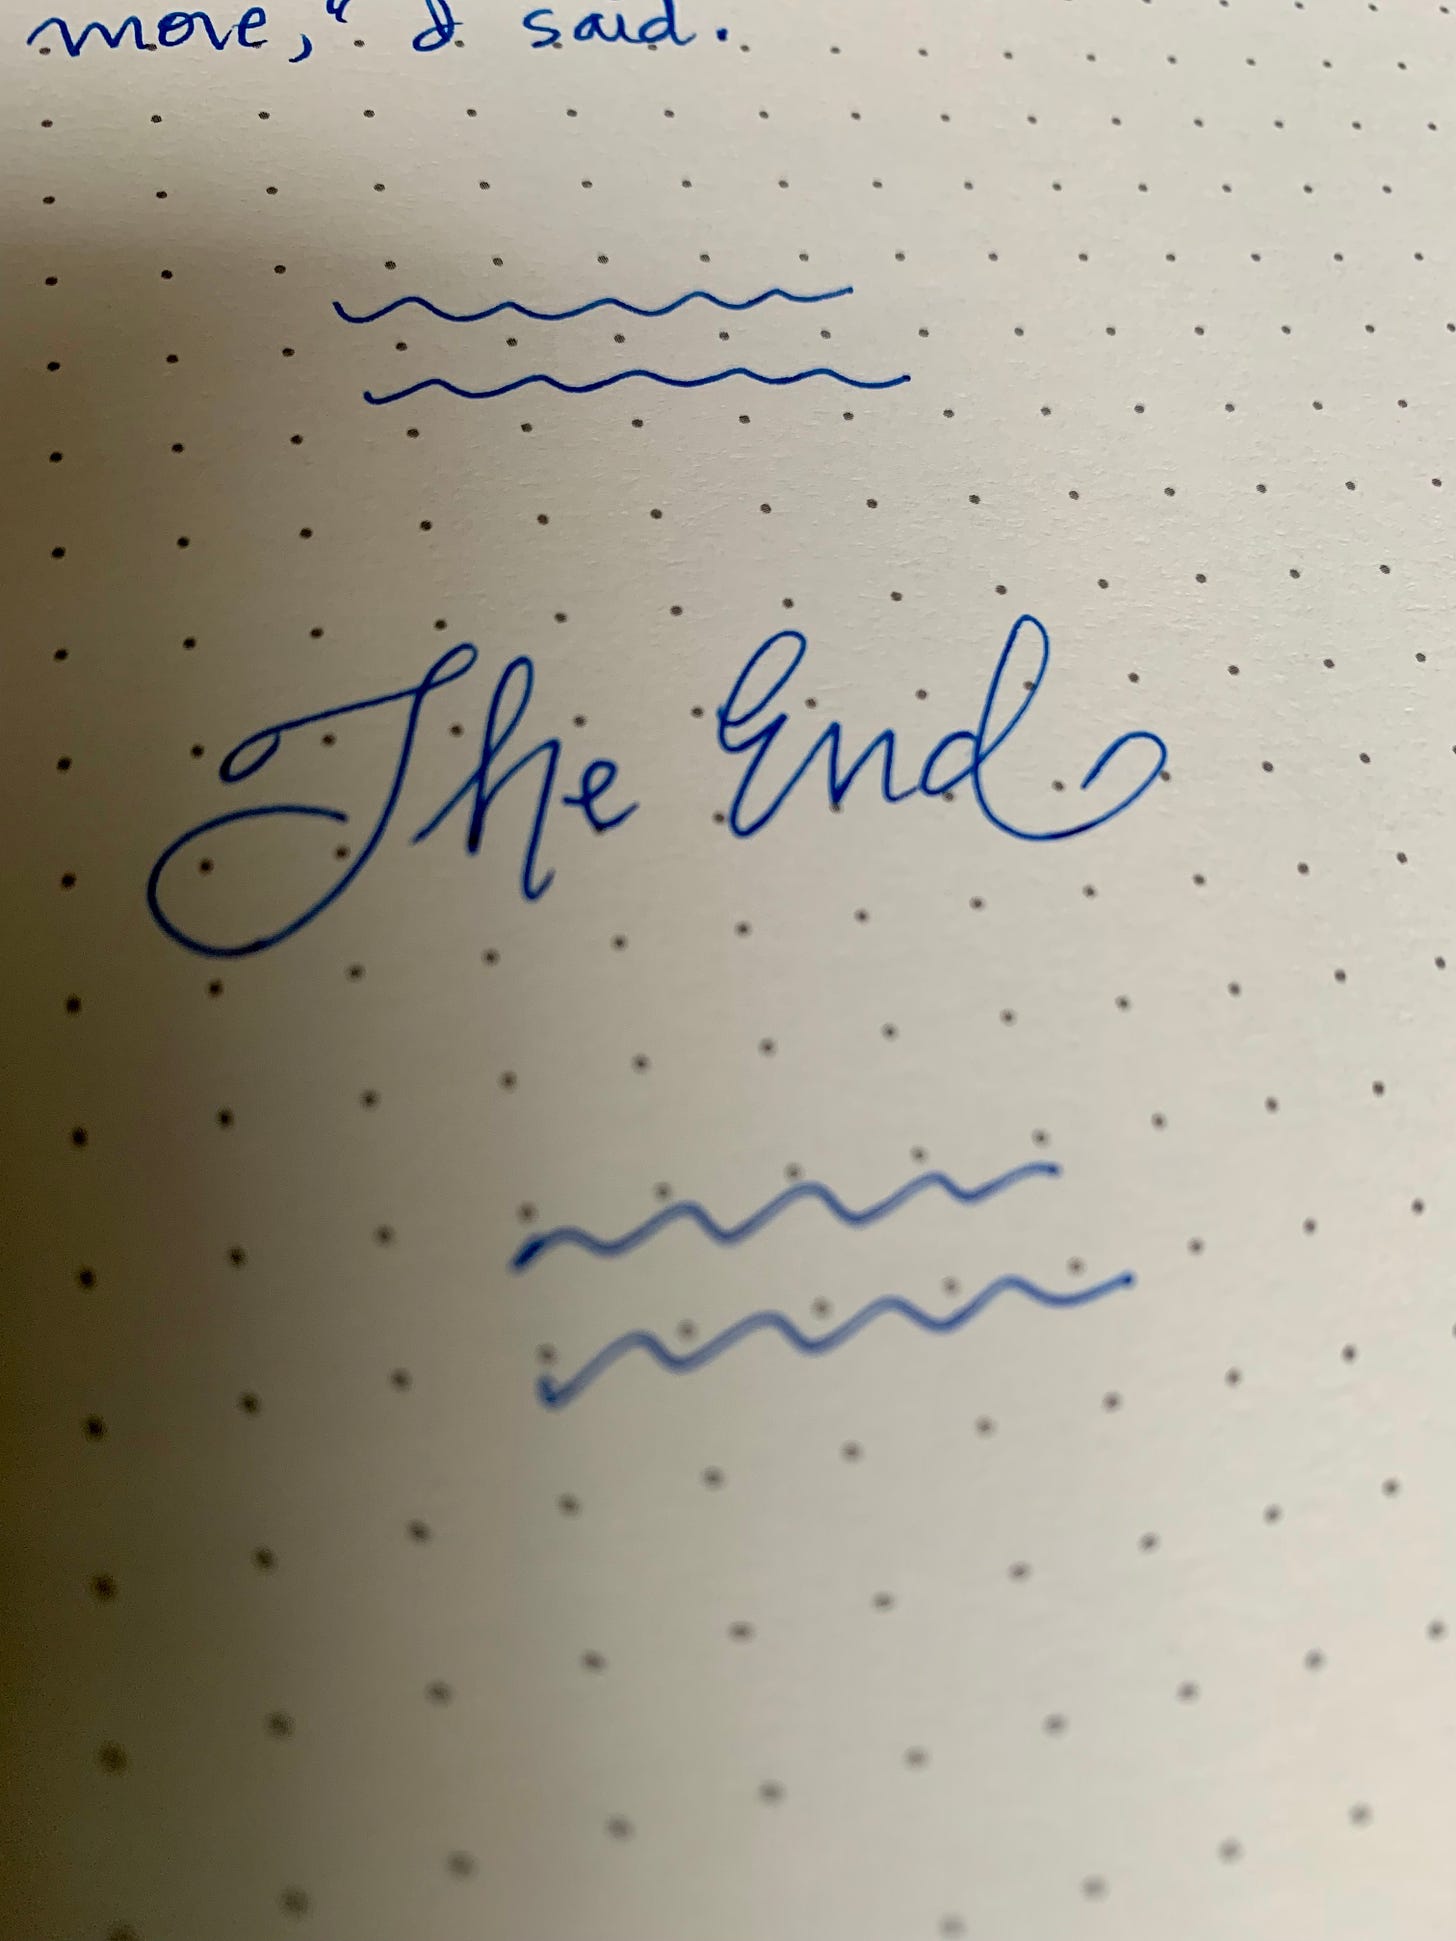 A page in a notebook. In handwritten cursive are the words "The End"